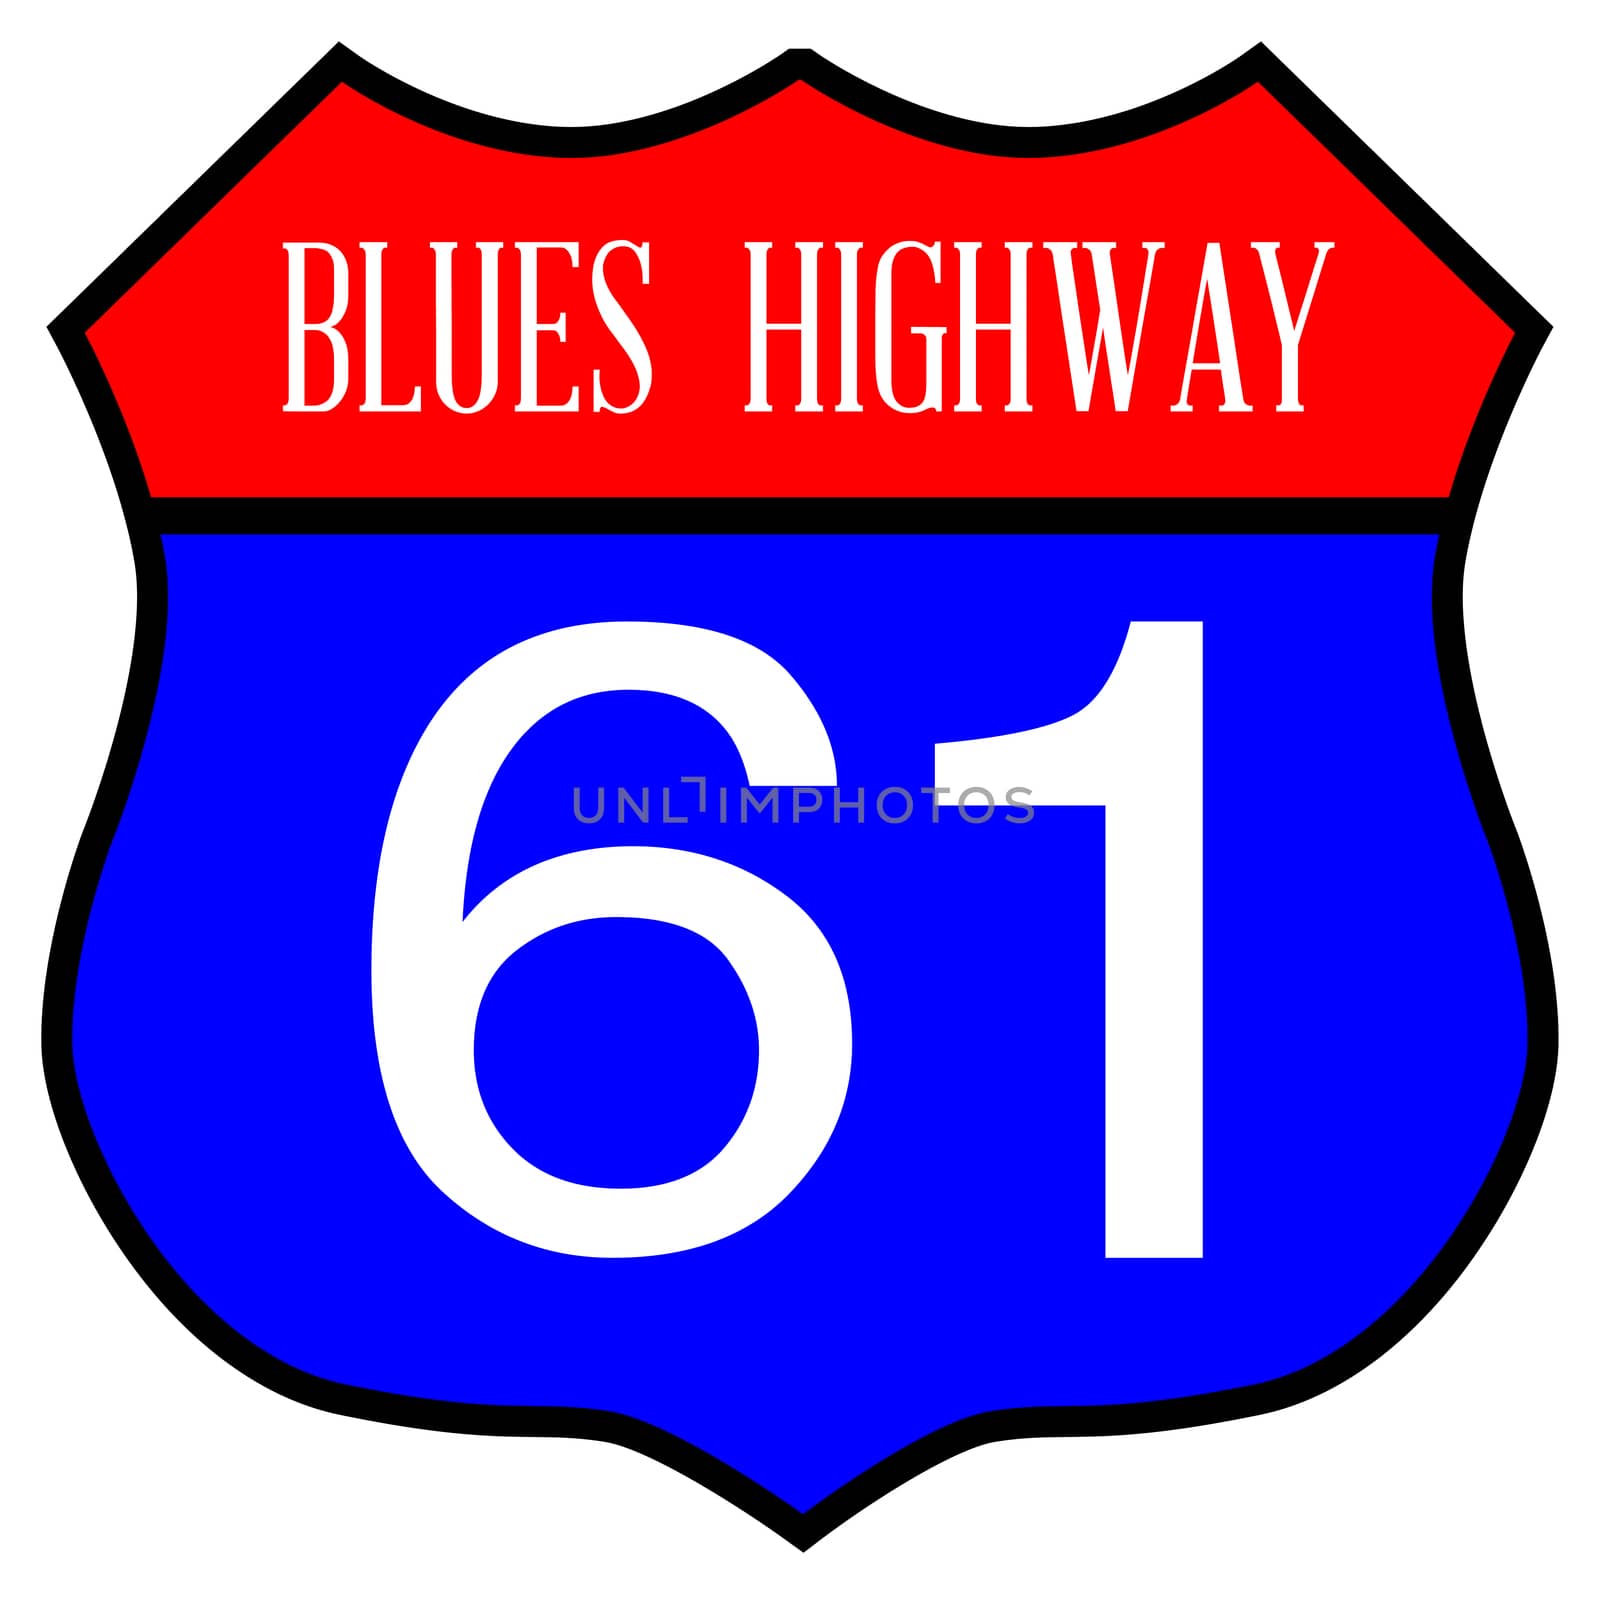 Route style traffic sign with the legend Blues Highway